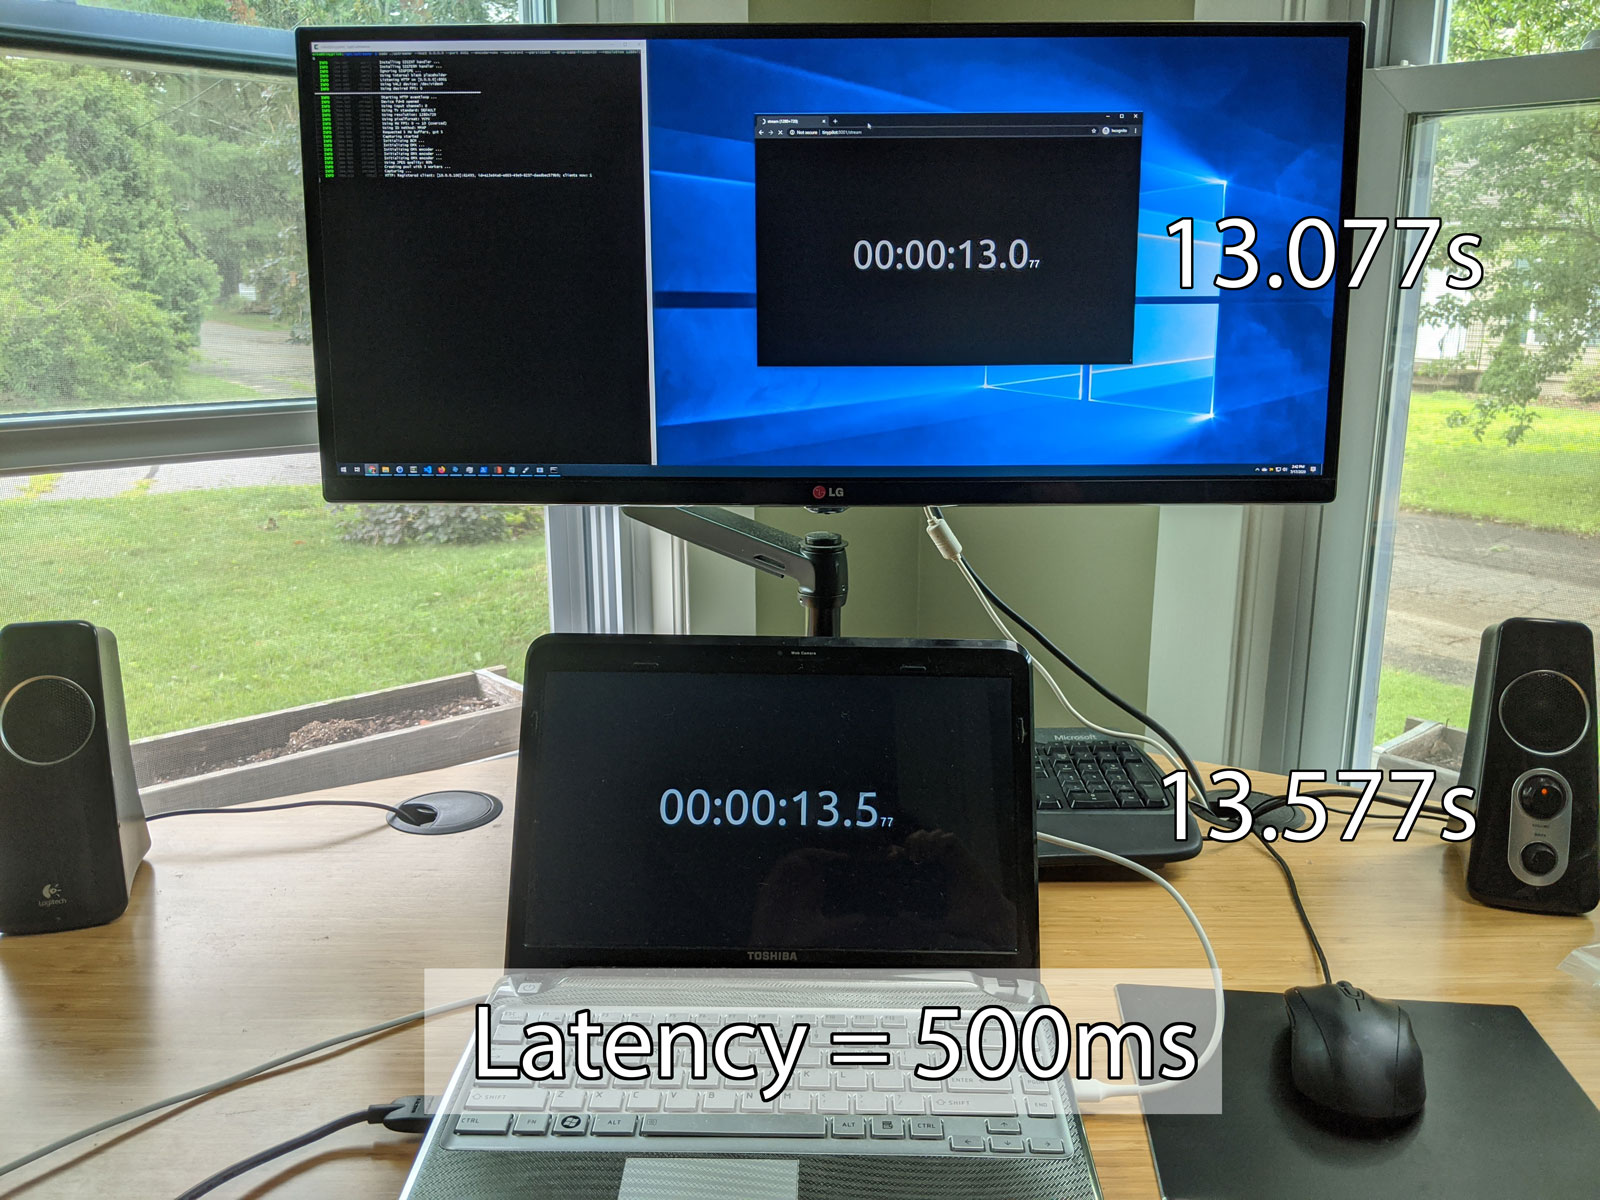 500 ms latency with uStreamer and the HDMI dongle